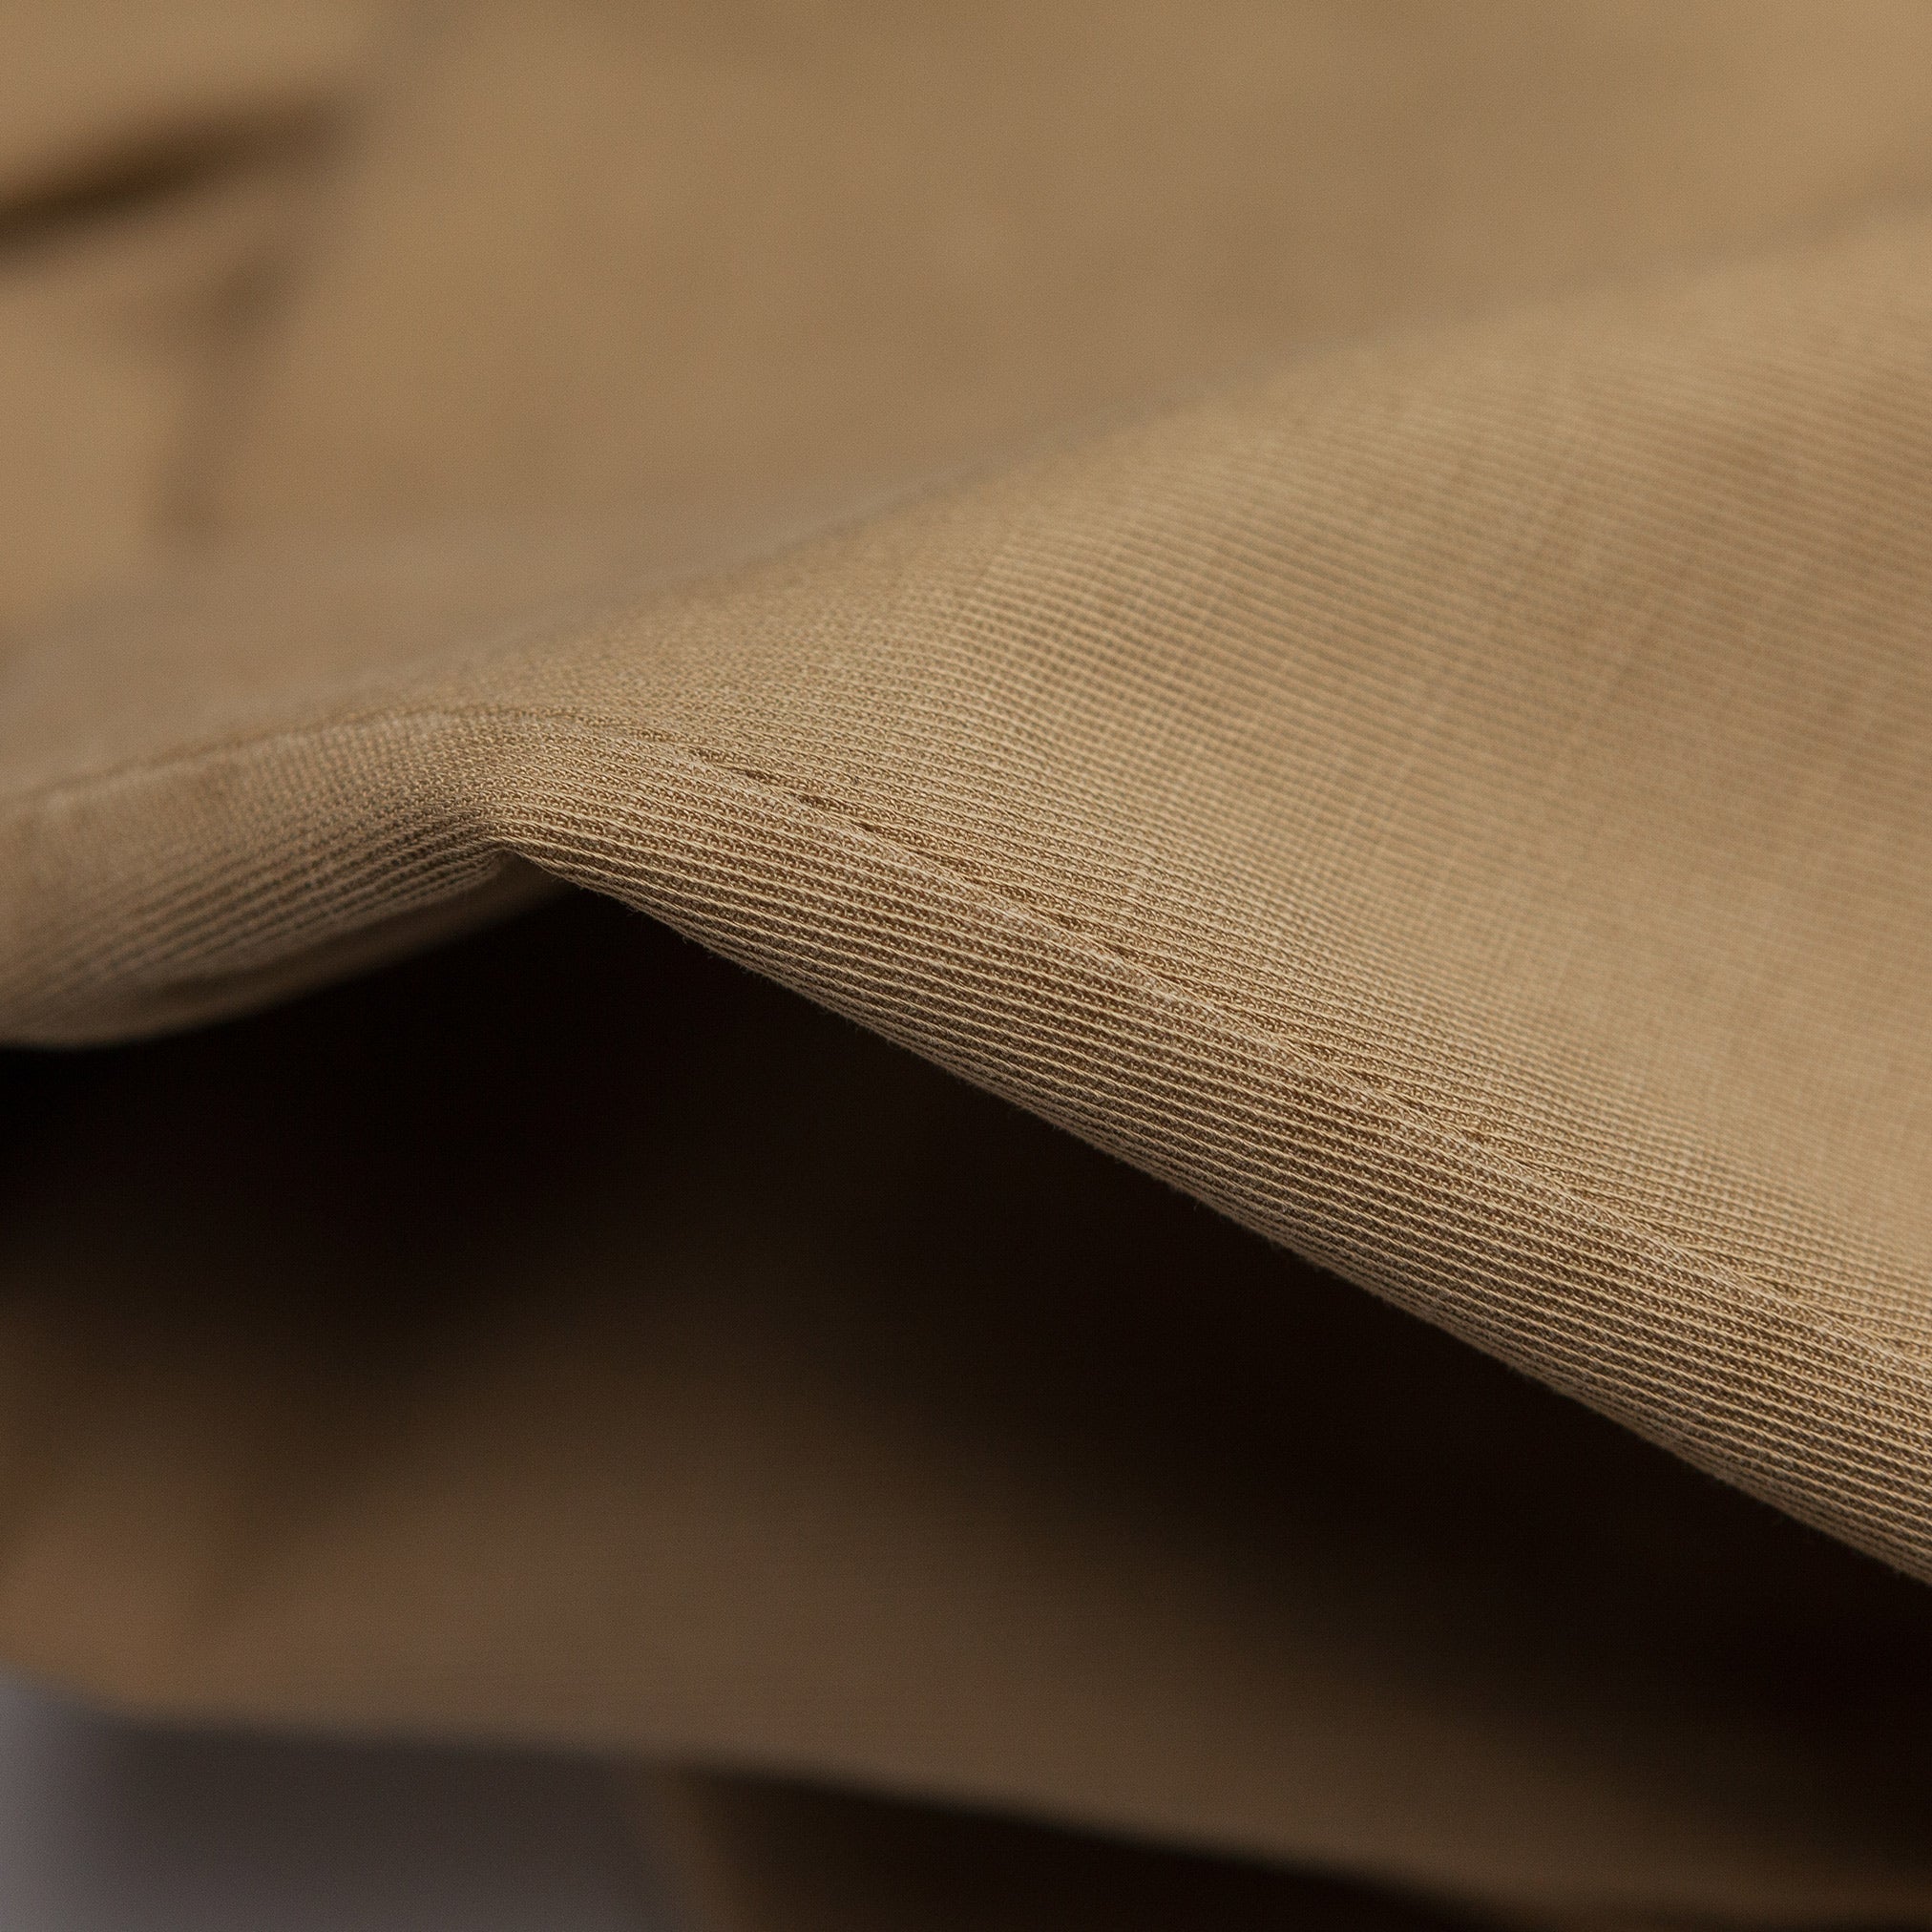 Chinos in Cotton & Linen Tan Twill